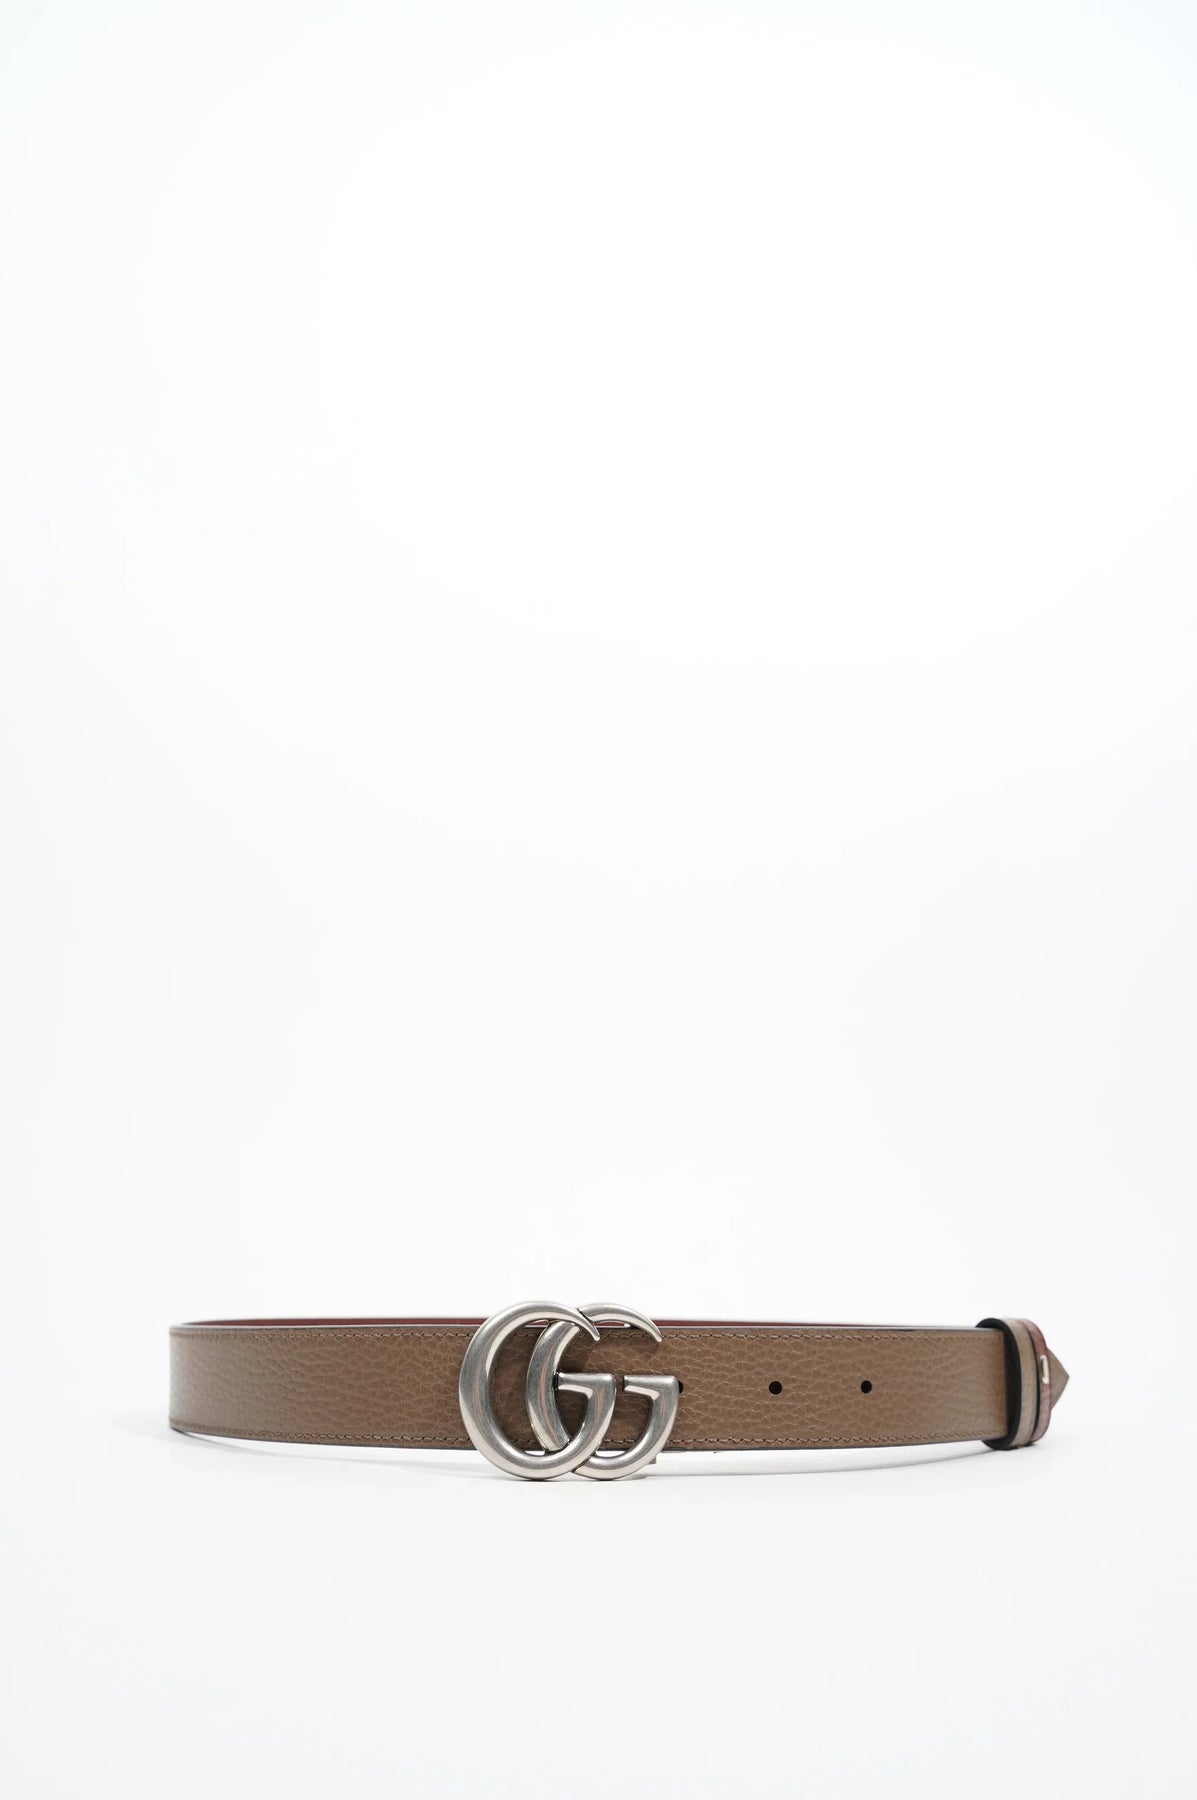 Gucci 30mm gg Marmont Reversible Belt in Pink